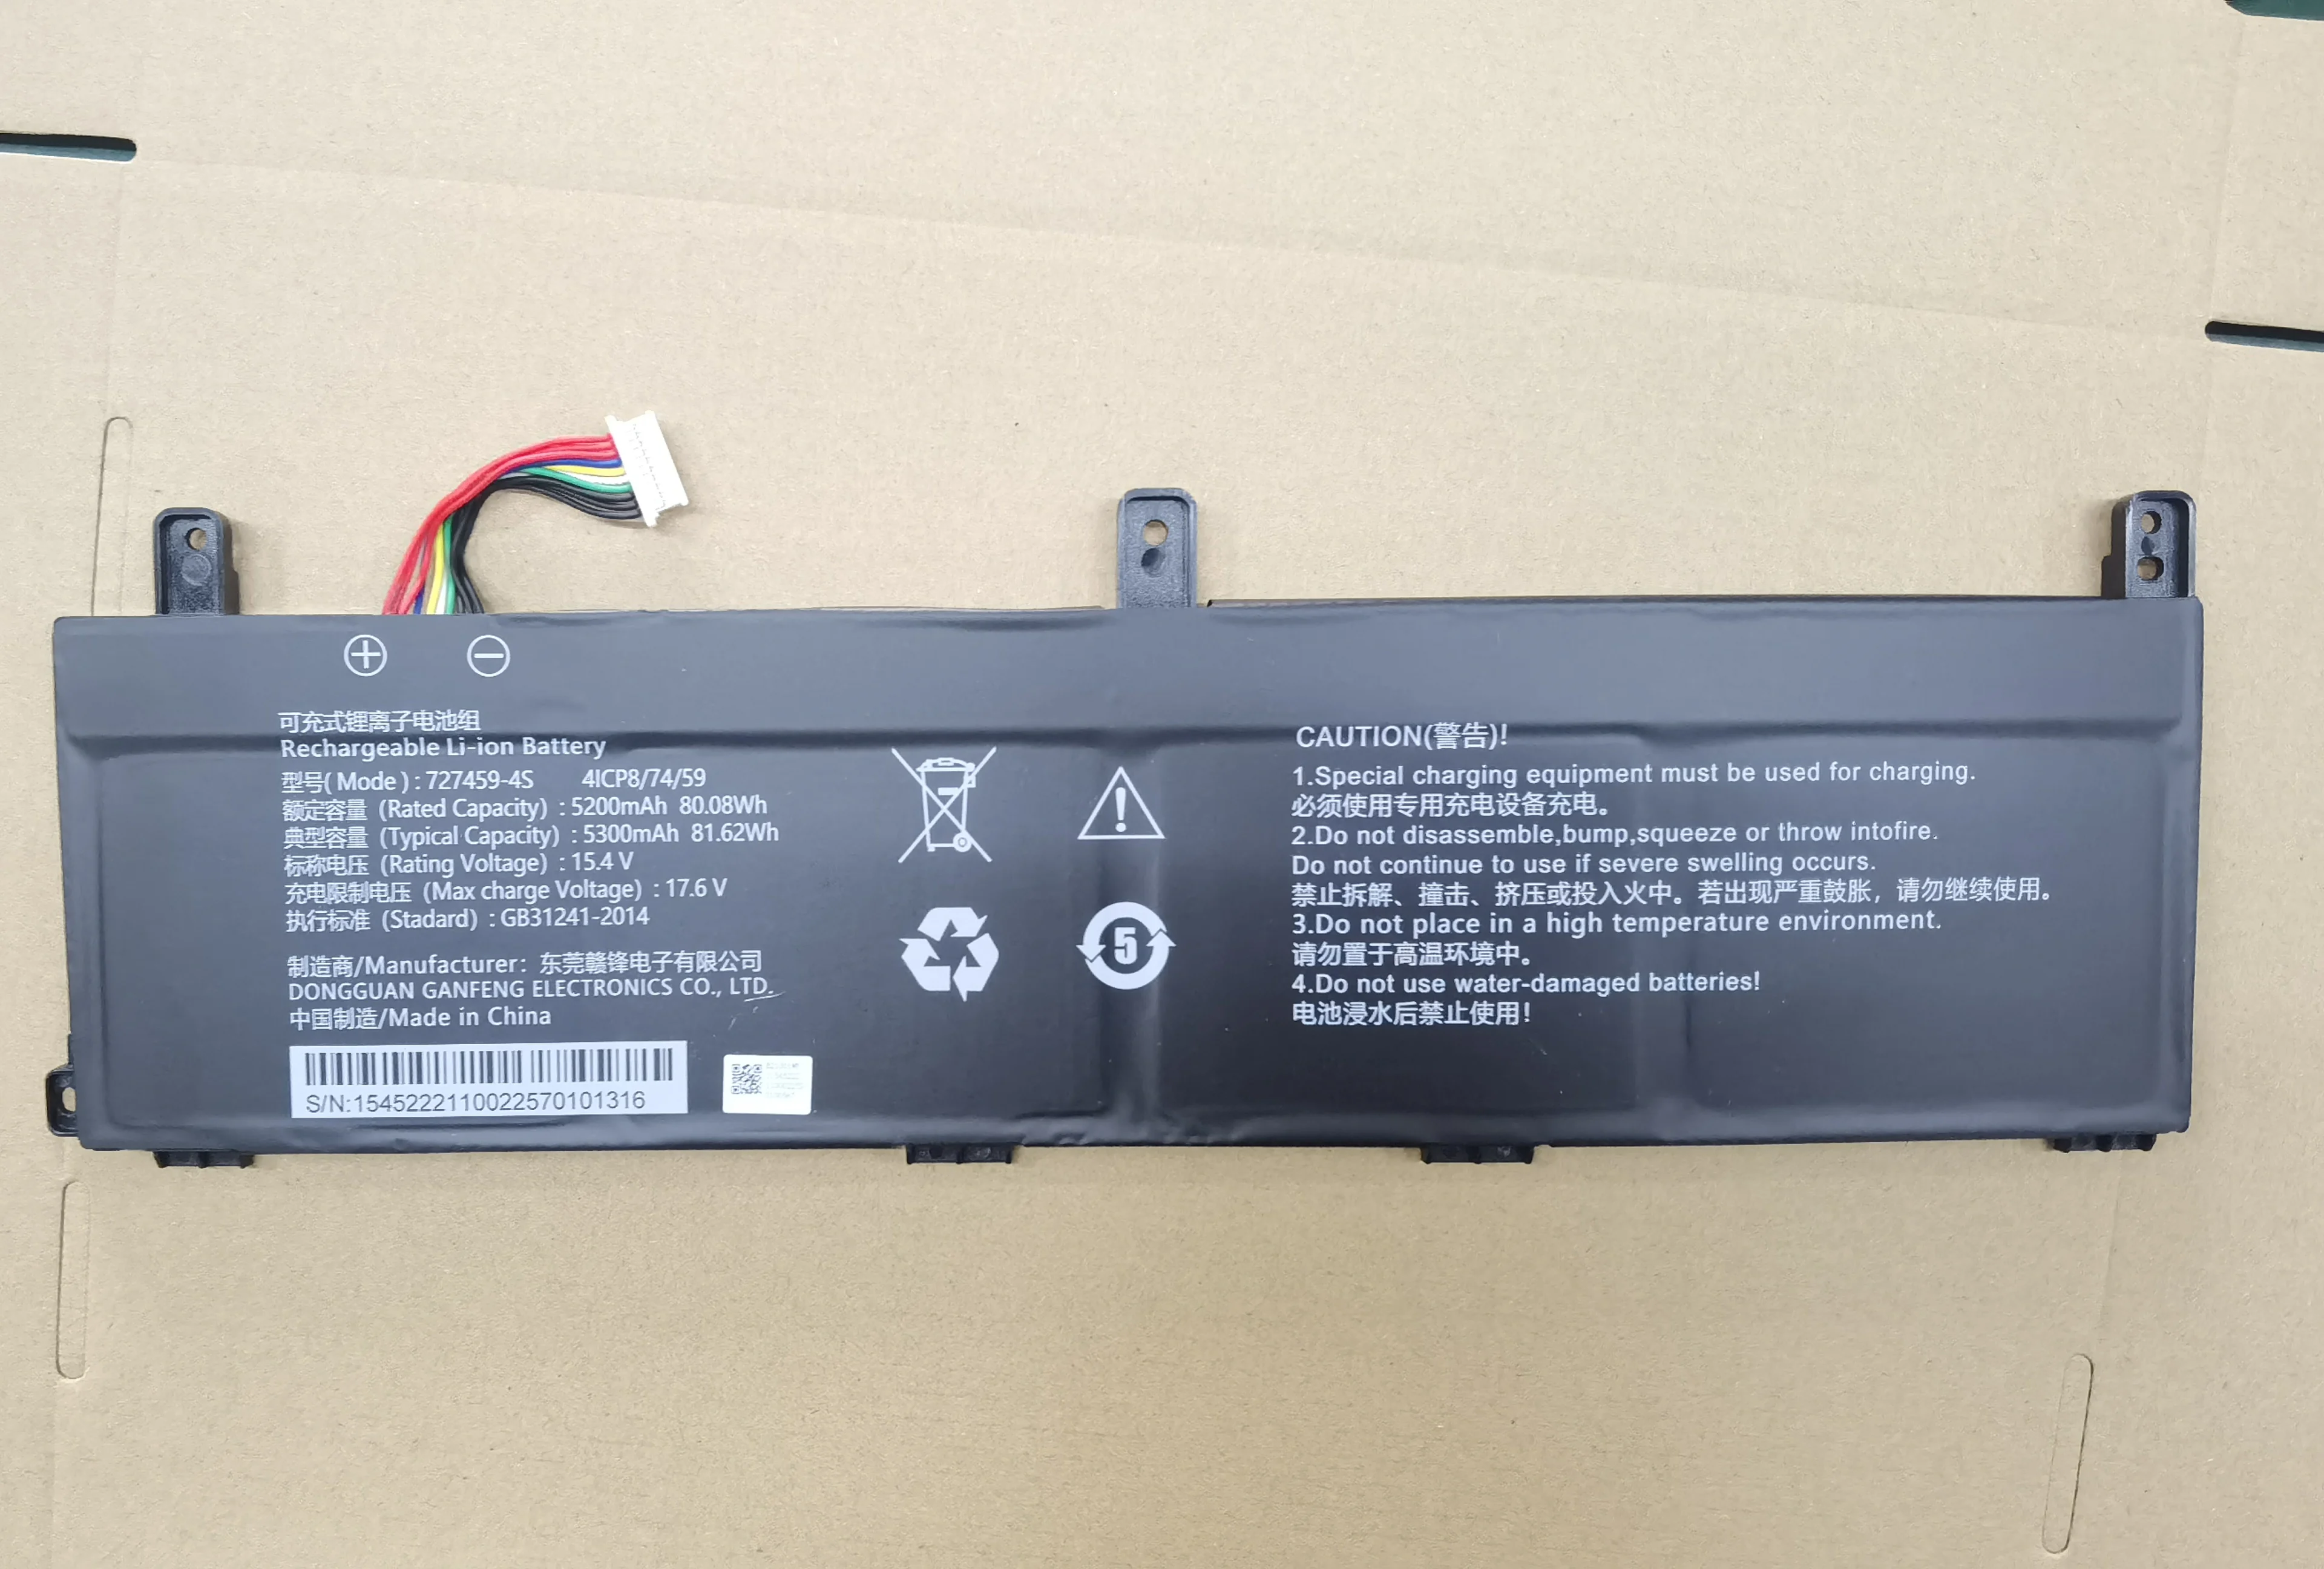 

New 727459-4S 4ICP8/74/59 Laptop Battery 15.4V 80.08Wh 5300mAh 10-pin 10-wire For Computer Tablet PC